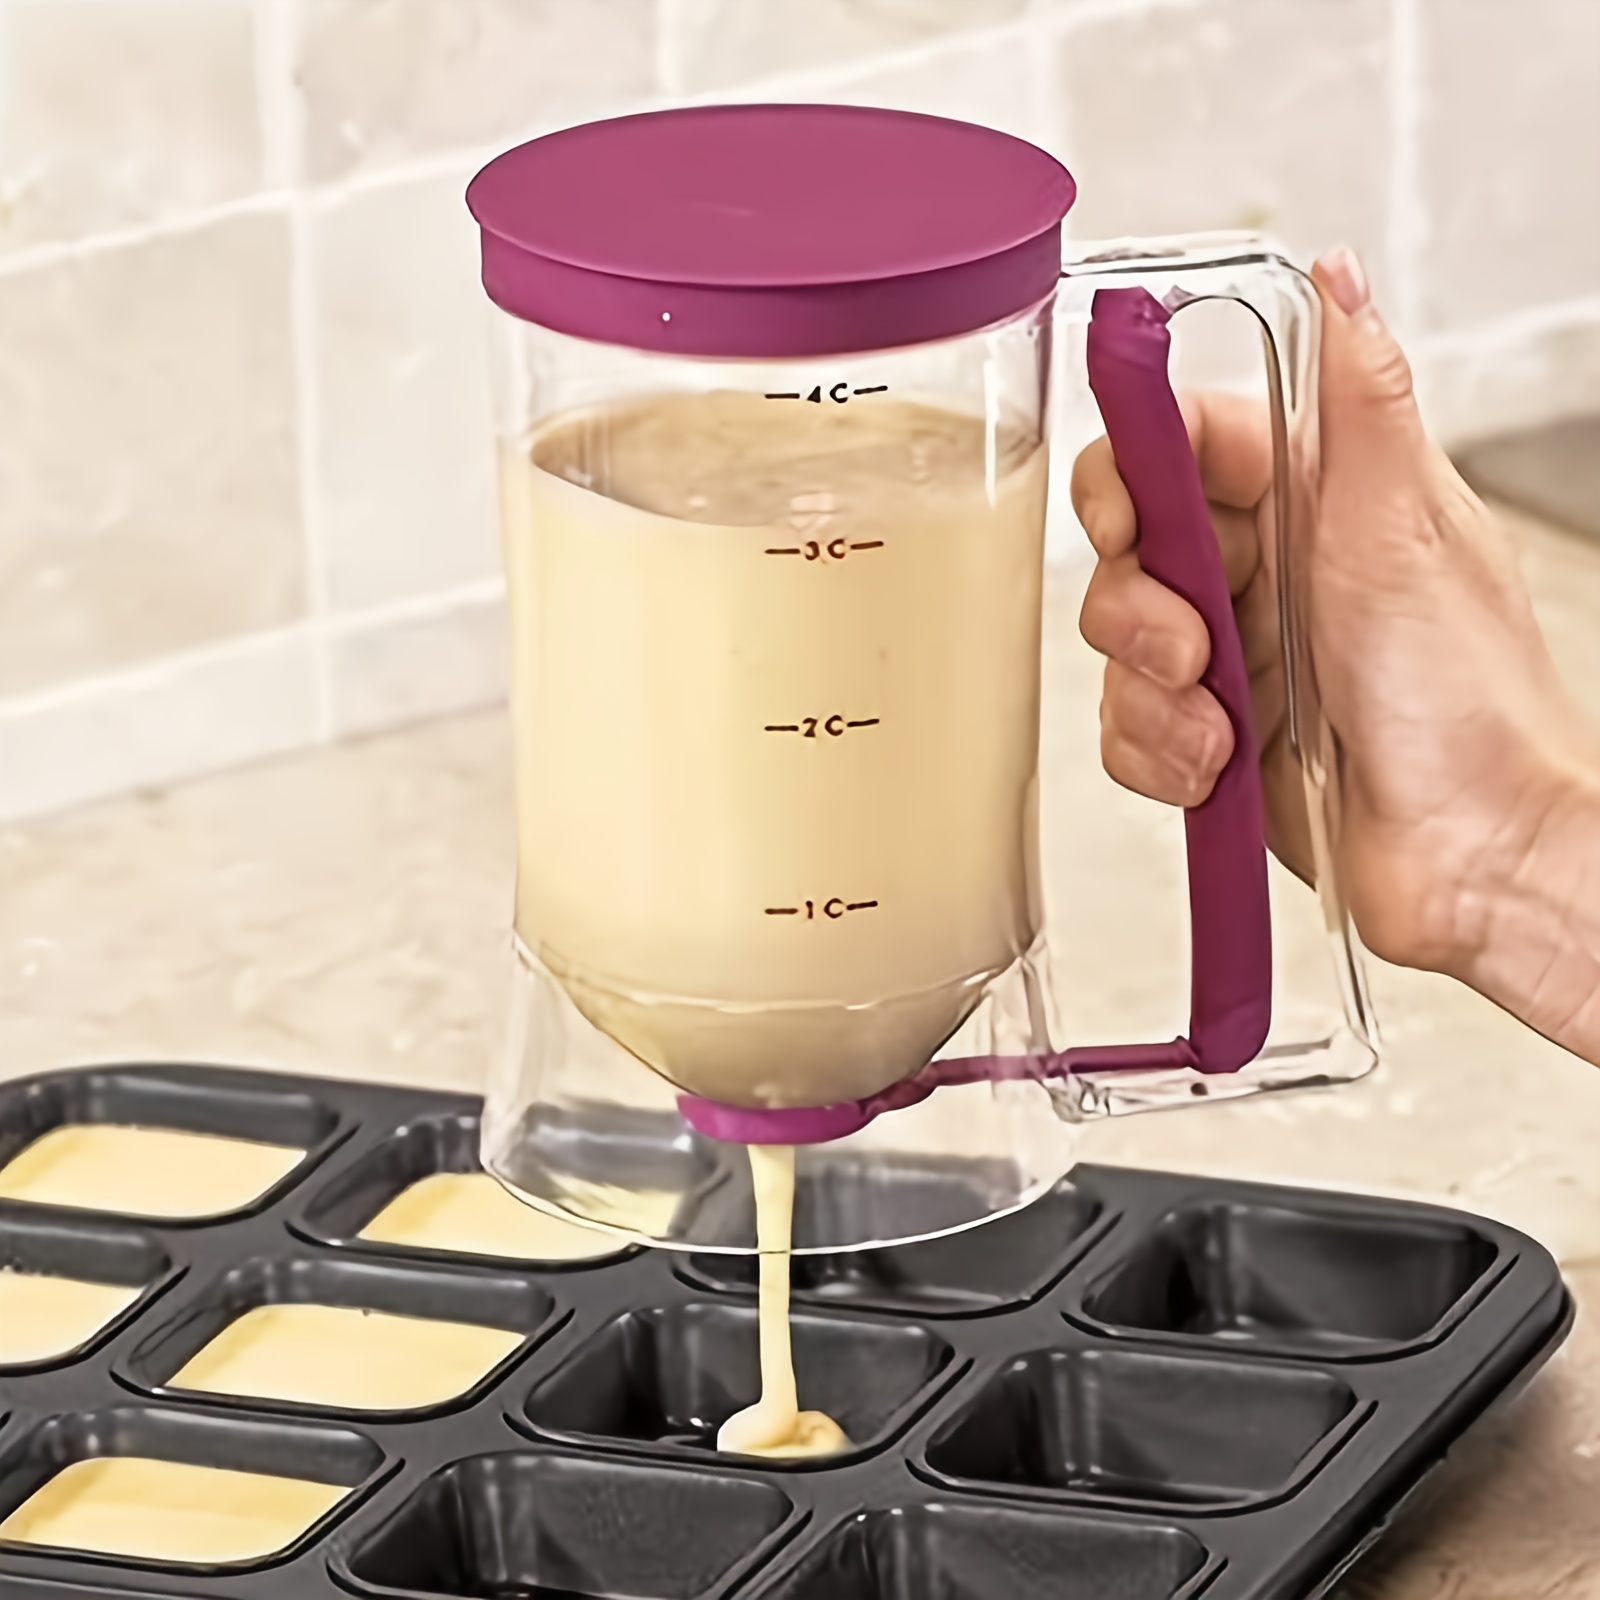 1pc Pancake Cupcake Batter Dispenser, Batter Separator Bakeware Maker With  Measuring Label, Perfect Baking Tool For Cupcakes, Waffles, Muffin Mix, Or  Any Baked Goods